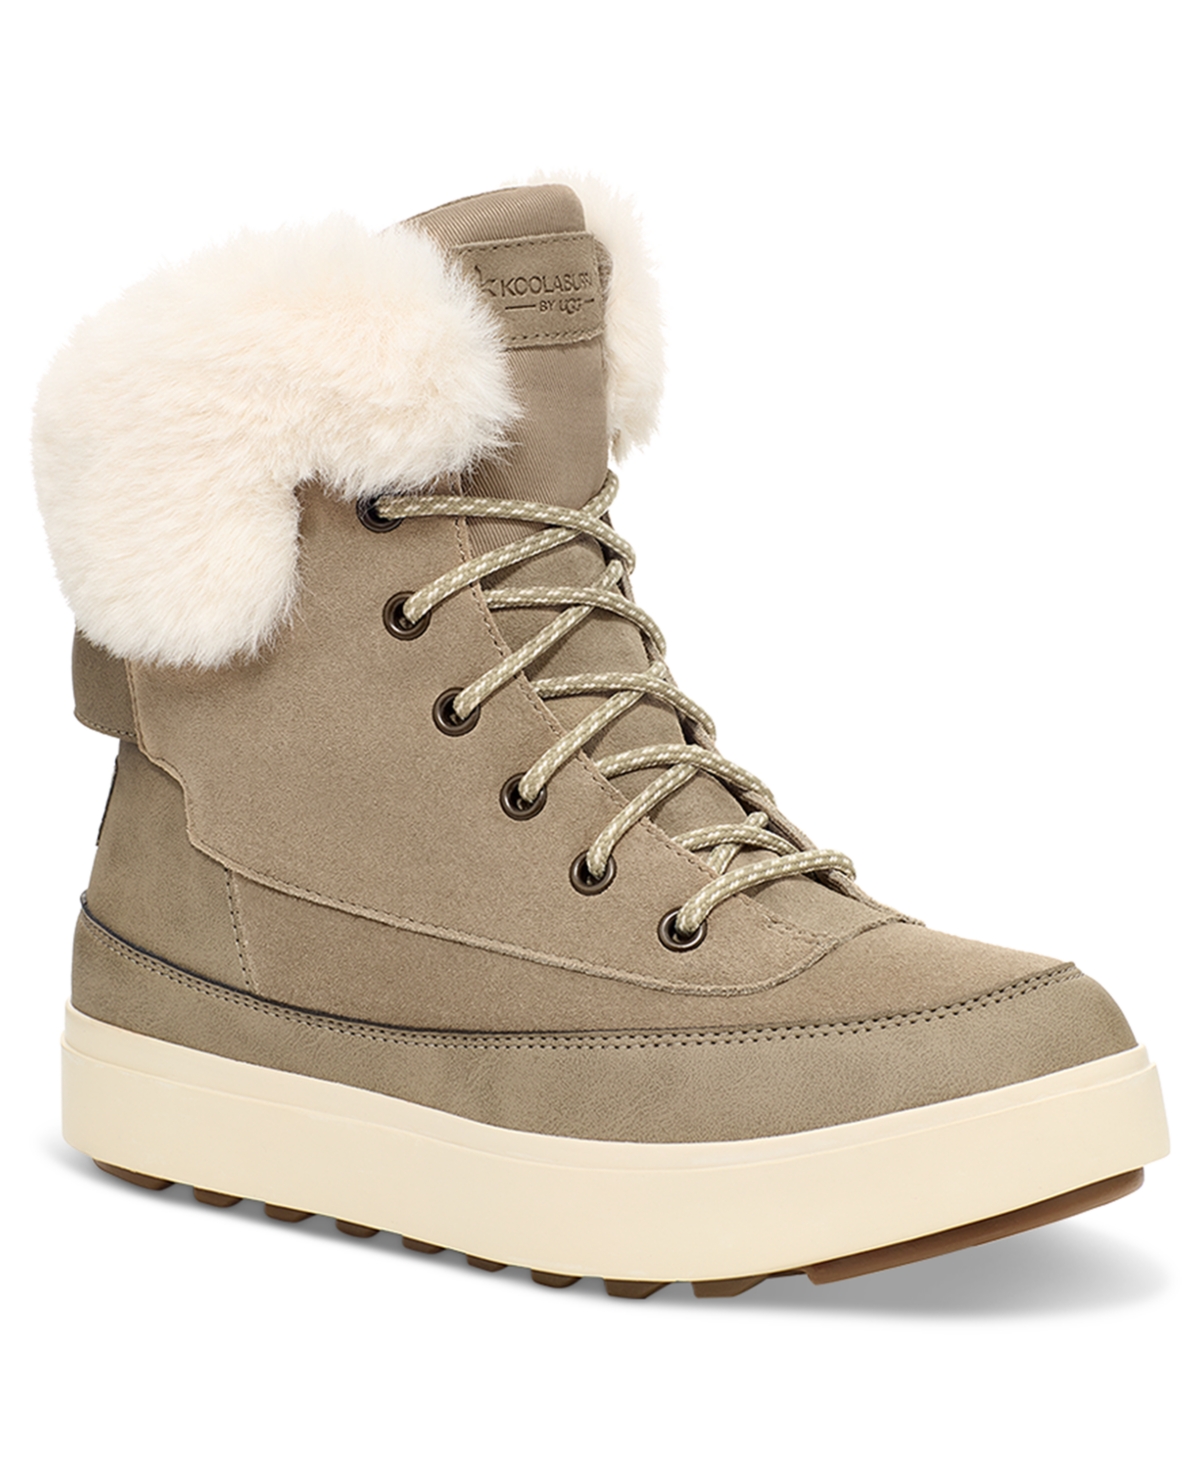 Women's Ryanna Lace-Up Cold-Weather Boots - Dune